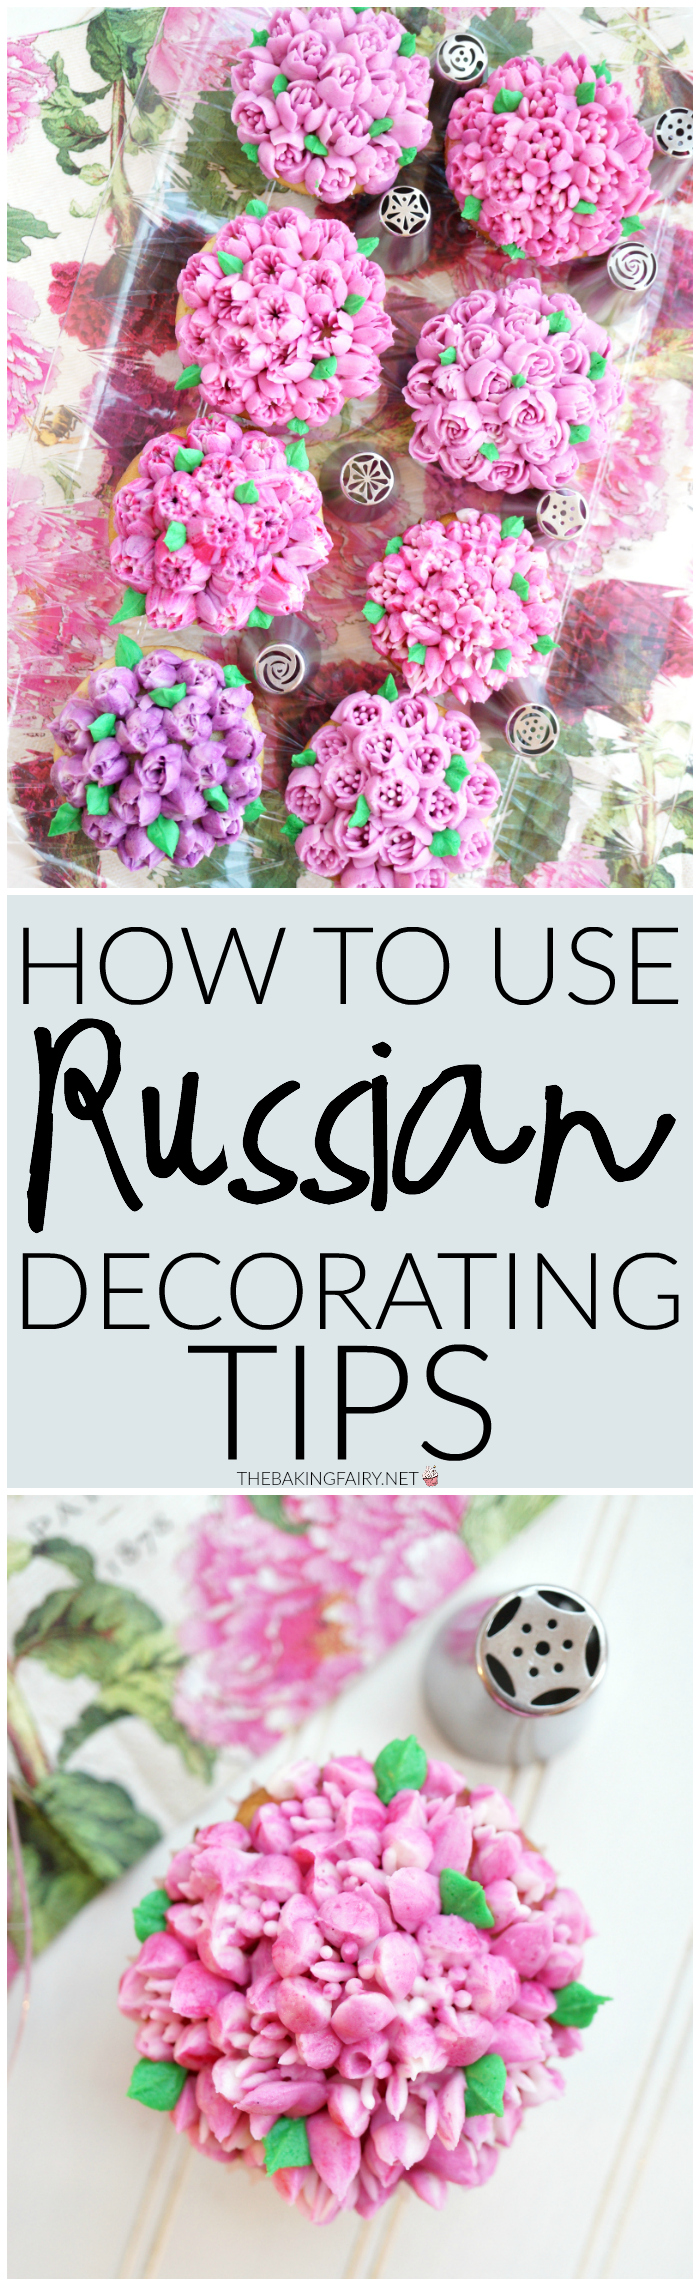 russian decorating tips 101 | The Baking Fairy